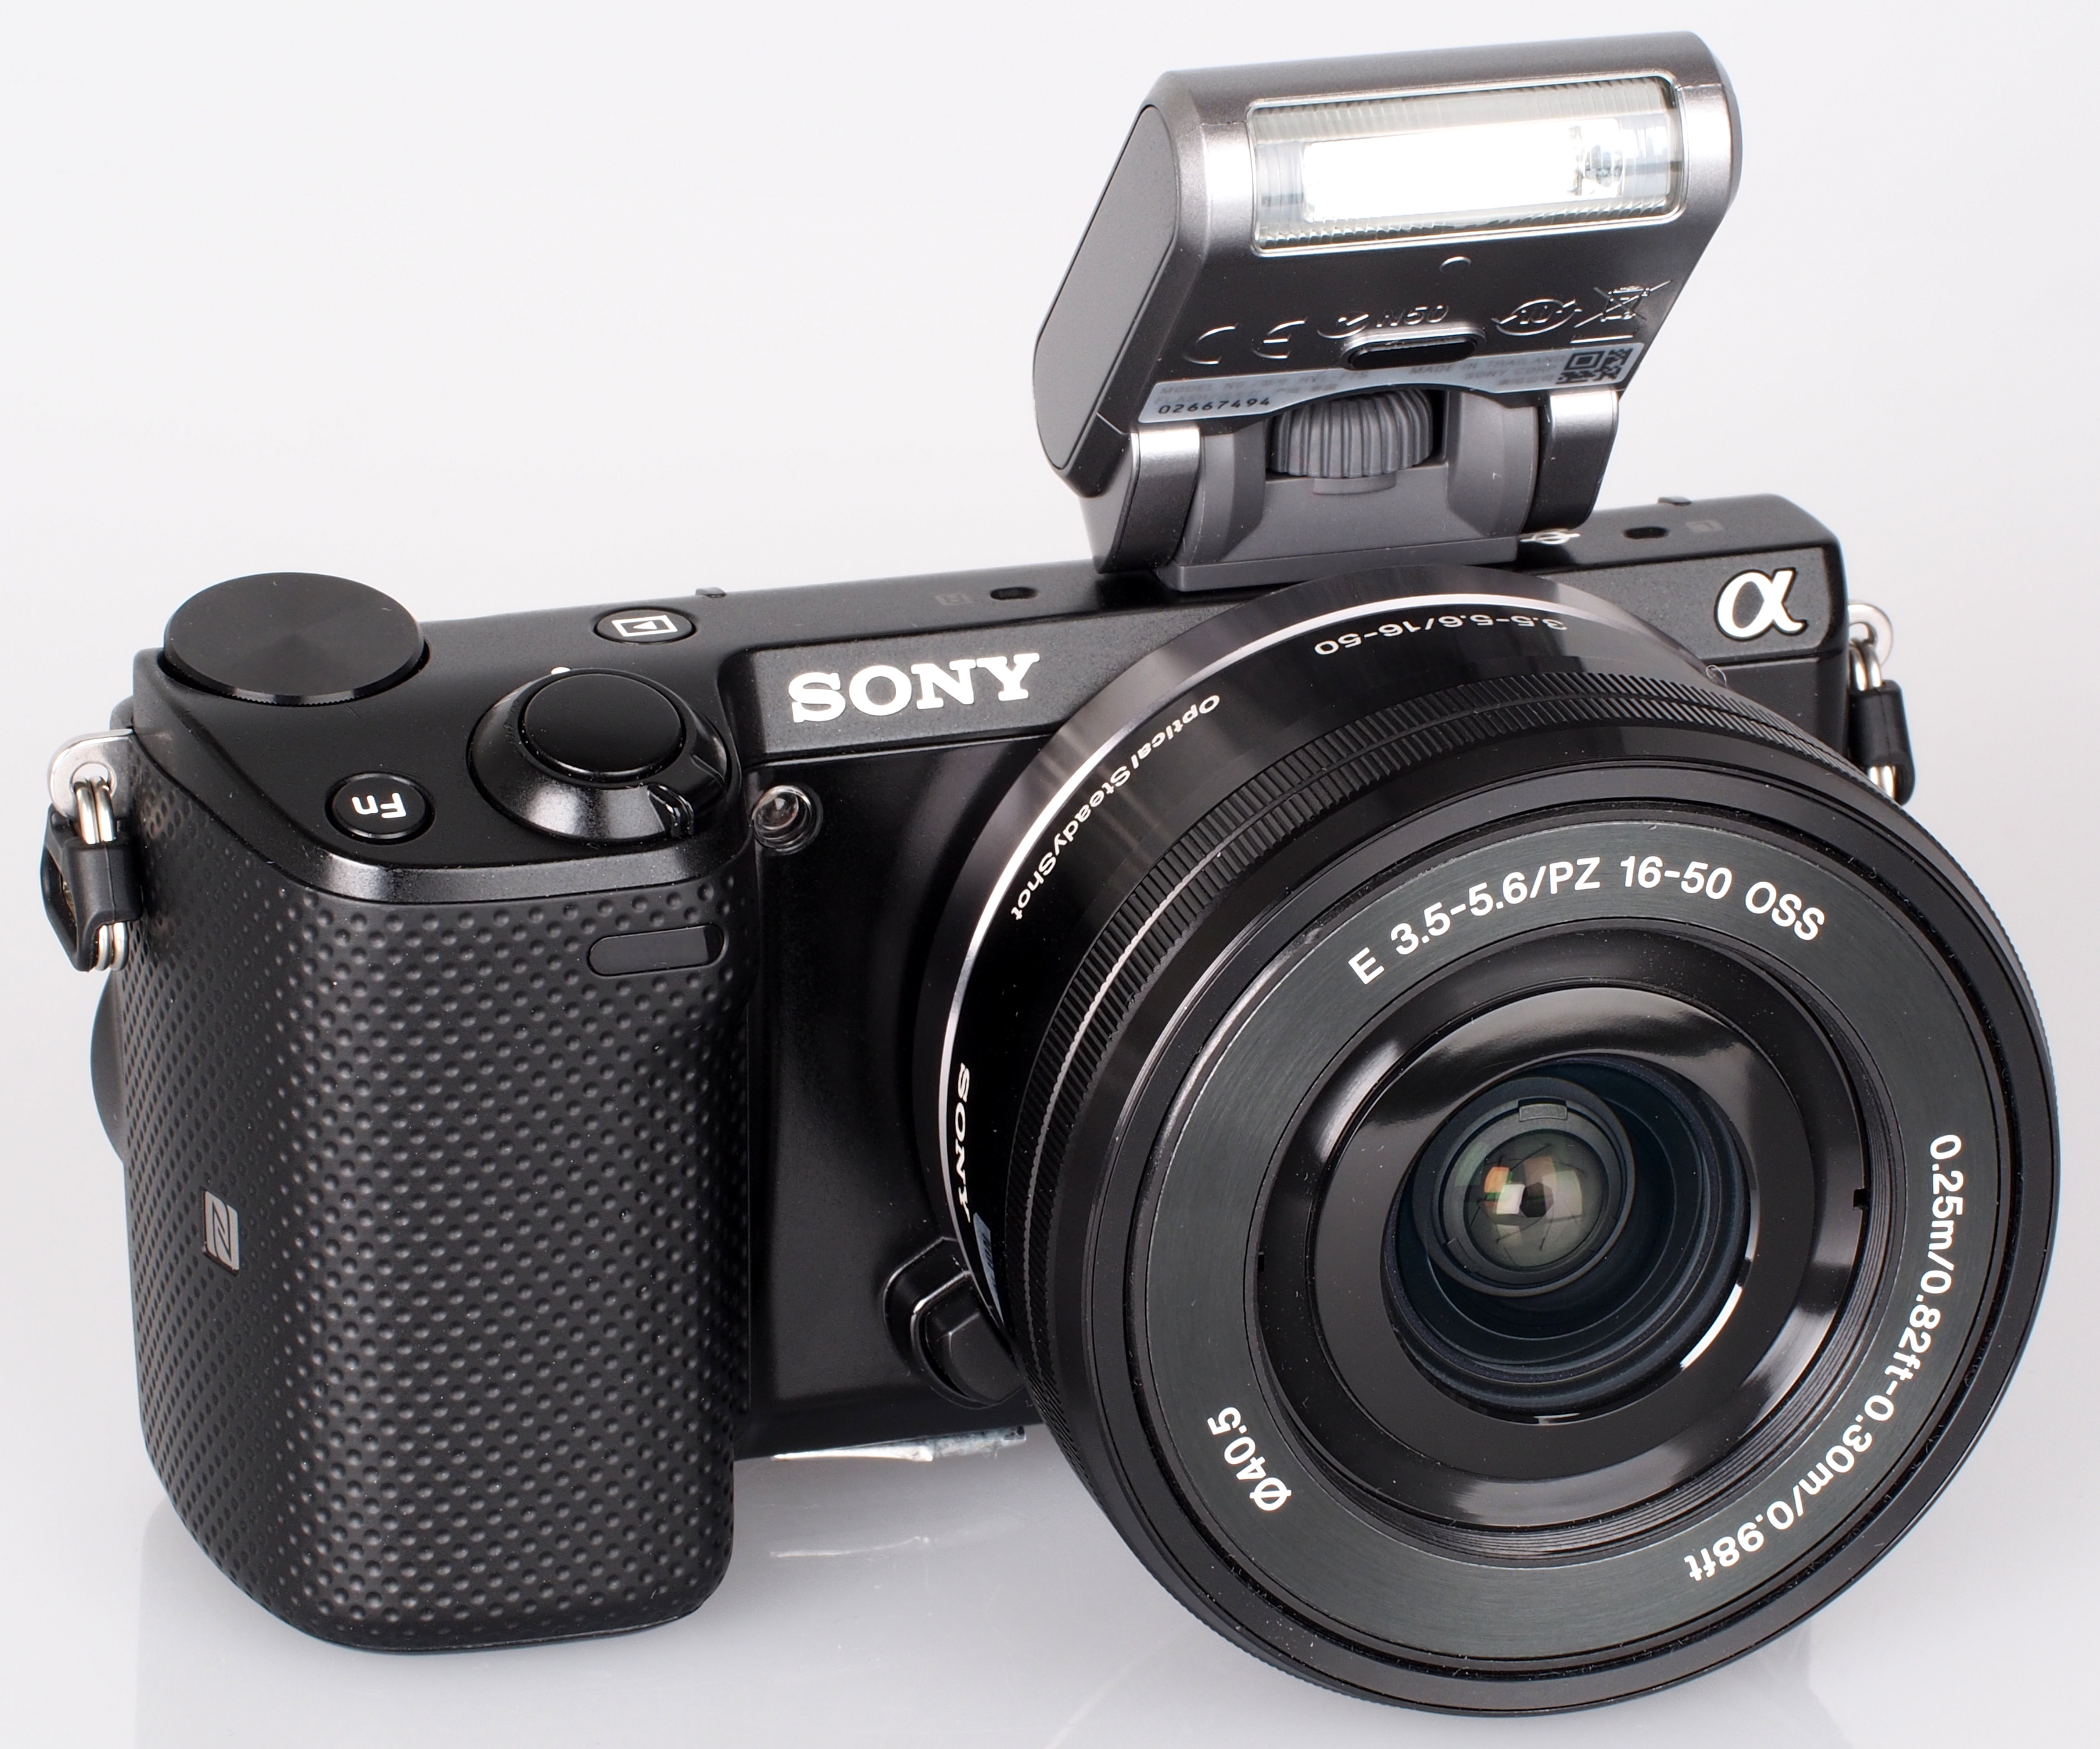 sony nex 5t review dpreview